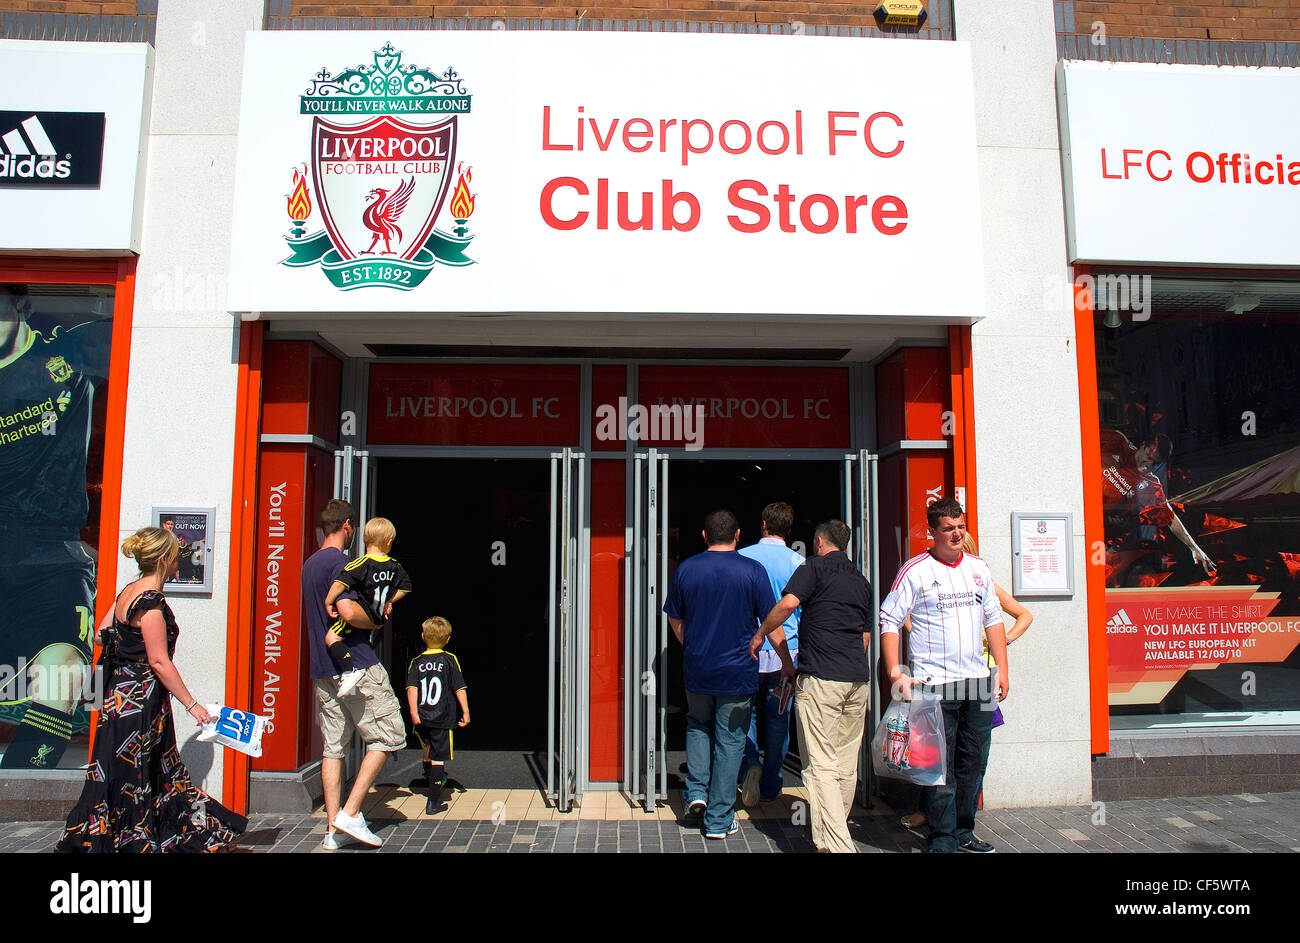 People entering and leaving the Liverpool FC Club Store. Stock Photo